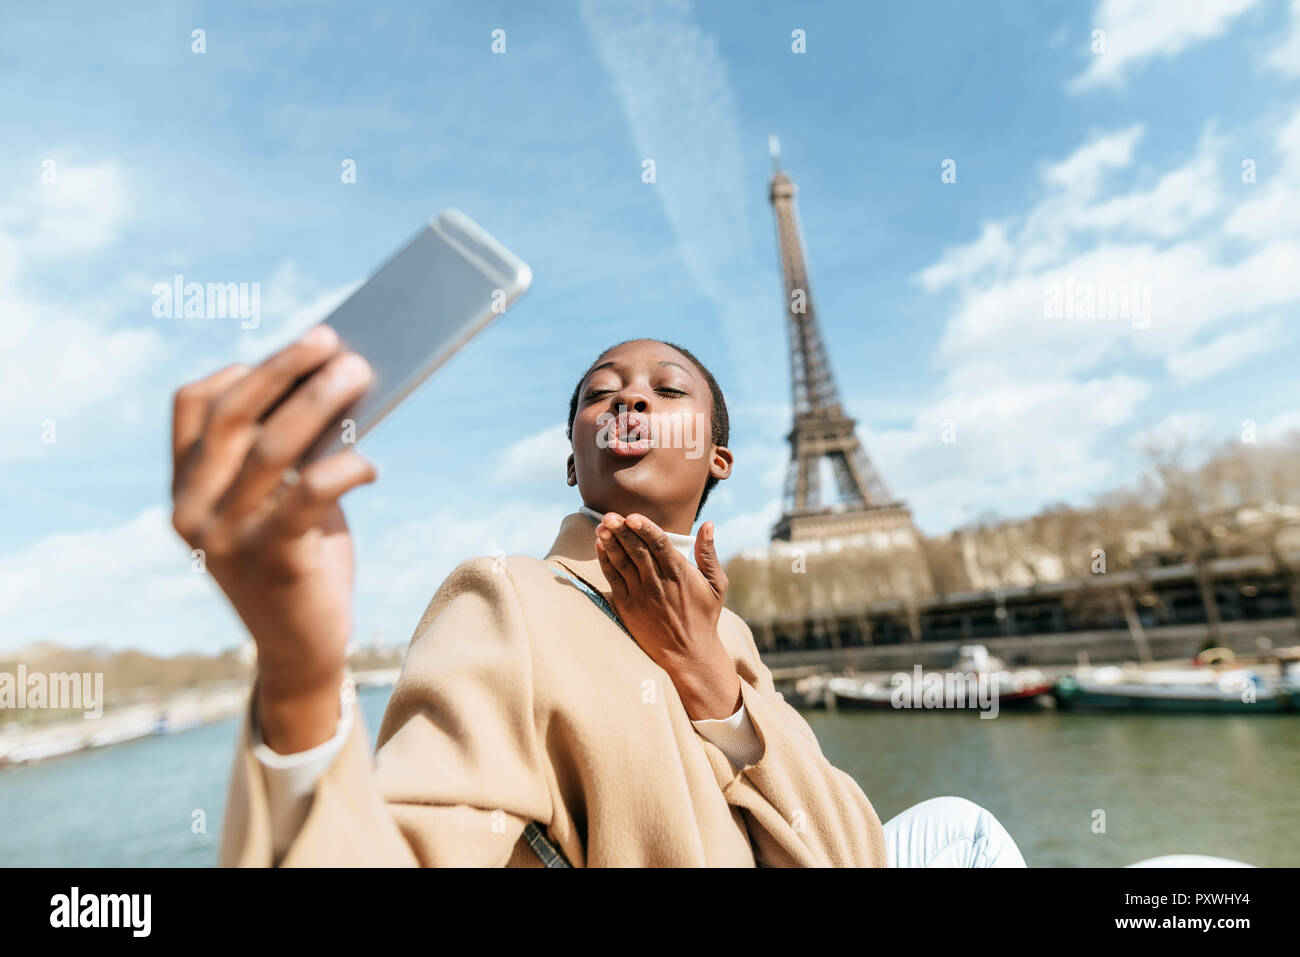 France, Paris, Woman taking a selfie with the Eiffel tower in the background Stock Photo